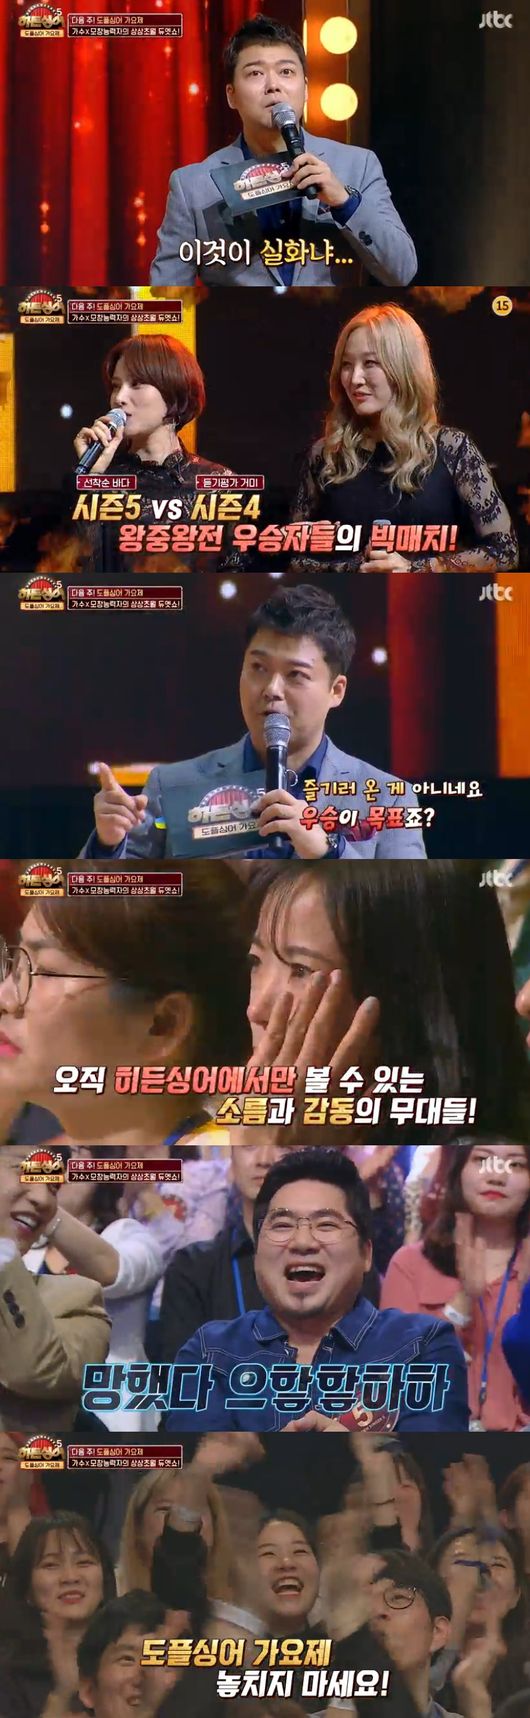 After the fierce battle of the gods, next week, the duet festival was announced and doubled expectations.In JTBC entertainment Hidden Singer Season 5 broadcasted on the 23rd, a special feature of the Kings King was broadcast.Jeon Hyun-moo introduced the underground practice room Gianti Park Jun-young as the eighth mochang god of the king.Gianti said, It is difficult to stage, do not discolor if you give me a tip. I do not need stage manners, I can stay still, please call me as you say.He then decided to meet separately, and presented his own sunglasses.Park Joon-young opened the stage with Yanghwa Bridge, which was painted with cheering lights like Seoul night view from Yanghwa Bridge.I have been singing live on the radio on Sundays, he said. There was a similar part when I saw the stage, especially the end syllables.I actually wore my sunglasses, and I called them as if I were a giant today, Park said. I hesitated about the stage results.With tensions mounting, Park failed to win the Top Three throne with 178 votes; An Min-hee won the top spot for seven consecutive consecutive victories.The original singer, the defeated winner, announced the start of the confrontation. At this time, the original singer Sea appeared like a colorful fairy.Jeon Hyun-moo said, Its like a script, and the next stage was Choi Sang-hyun, a first-come-first-served sea.Sea said, Show me the passion and energy that will burst like a new womans eyes, like Zandark. It is your purpose to be me.The song began with a lot of expectations about what stage to show. It was a counterattack.Lim Chang-jung said, The chicken has grown, he said, the voice I have heard since I was working with you. It was really the same, a stage that does not even need modifiers.It was a class that other protégés would fear: Sea was convinced that he had practiced so much that his eyes were red, he would win by two votes.Lim Chang-jung and Yang Hee-eun predicted the first place, saying, I expect the first place. It is possible to exceed 265 votes. An Min-hee also said, I think it will be lost.All of the top three were considered strong candidates.With attention to how many of the 300 would have received, Sea expected 290 votes, which would have exceeded the highest score of 285 votes.She pushed An Min-hee, who was the number one player in seven consecutive times, and for the first time, she changed her position.The following was milk delivery Hong Jin-young, Yoo Ji-na, who stood up and cheered.Hong Jin-young tipped, You can be one with the audience, and recommended thumbs. He even delivered hip dancing.The stage of Yoo Ji-na, which discharged to Goderie Hong Jin-young, began; it was a charming parade that beat Hong Jin-young.Hong Jin-young was also surprised, saying, I thought I was out. I expected the top three. Besides, I promised a song gift.Whether to shake the top three composition, Yoo Ji-nas score was revealed. Top three failed with 238 points. Hong Jin-young comforted him, saying, Its okay.With the top three composition unchanged, the next stage was Kim Min-chang of Kangta, the bookmaker, and the meeting between Kim Min-chang and Kangta, which H. O. T. members also recognized, was drawn.Kangta recommended Arcticity; Kangta said, Pretty much more than you call it by nose, make a sound, and was convinced that its a voice dubbing feeling, a win that I record.As the first episode, the expectation was gathered as much as the original singer. Kim Min-changs stage began.Every single word was a series of surprises. I was touched and thrilled as if the real Kangta had called.Jeon Hyun-moo admired the face is Lee Jae-won, the voice is Kangta, H. O. T. itself.Sea said, There were so many creepy parts because it was the same. Lim Chang-jung said, It is really the same as the live in Kangta karaoke, and the delicate vocals are admiration. I know why you are the winner.In the hot reaction and reversal that overtook expectations, Kim Min-changs votes were revealed. He surpassed An Min-hee and became second.Choi So-hyeon, who is in first place, and Kim Min-chang, who is in second place, showed the power to defeat the original singer in the kings king.The next was Ailee, Kang Go-eun, who lost 15 kilograms; she was a vocalist who looked just like Ailee and a charismatic who overwhelmed the crowd.Enjoyment and confidence are important. The end process was English pronunciation. Then the stage began and showed the singing ability like Cider, who defeated the original singer Ailee.Hong Jin-young was appalled, saying Ailee-specific English pronunciation is the same; Kang Go-eun said he trying to follow his sisters swathing pronunciation.Lim Chang-jung said, It is important to sing similarly, but the song itself is good.Kang Go-eun said, I actually asked Ailees sister about the secret of being good at live. He said that he had learned the performance backstage with Ailee invitation.Kang Go-eun, who had a powerful stage, was released with the results of the vote, while Kang Go-eun expected third place.Kang Go-eun said, It was my goal to enjoy it fun.The final stage of the long-awaited event was only left. It was noted whether the top three could be broken.She was a deep-rooted, emotional figure of the original singer, a small but hard-working man.Kim Yoo-jung asked, It is difficult to evergreen and how to call it.Yang Hee-eun said, There will be a part of the song that is pulsing in any passage, and concentrate more on your mind.What you do not have is a big property, keep that in mind and call it, and eventually the song is to do with your heart, to fail and make mistakes and become an adult.The stage of the song Evergreen was started, which was the heart of the minor actor Kim Yoo-jung. It was a warm stage that conveyed comfort to everyone.Yang Hee-eun said, In fact, Evergreen is a marriage celebration song. He said, It was a celebration used for the joint wedding of young people who have nothing. I was thirty, I had nothing at the song, I am okay, I said.The panel said, It felt more profound, a meaningful stage that saw Kim Yoo-jung, the main character, not a single actor. I felt like leaving the song and conveying the lyrics.Cheongha said, I was encouraged by my sister, I want to tell her that she is a person with a big gift, he said, the time when it was awkward to watch audition, the sister who exchanged ambassadors for the first time.Jeon Hyun-moo asked for the prospect of the vote.Kim Yoo-jung said, I did not consider the rankings and wanted to sing with my heart and convey my heart like the teacher said. The scope of understanding is youth, but I wanted to be a force for all youths of my age. Yang Hee-eun said, Today, I want to give 300 votes to my heart.Kim Yoo-jung, who had written everyone on the stage to convey his heart, whether he could break Kim Min-chang and Choi Min-hyun from top three An Min-hee, who is a powerful power, failed to win the top three with 227 points.Nevertheless, Kim Yoo-jung, who embroidered Yang Hee-eun in the 48th year, left a great lull with a deep echoing stage that left the synchro rate and left the mind.The final ranking was Ahn Min-hee, the second-ranked Kim Min-chang, and the prize money of 20 million won and the European Oabok ticket were 280 votes, with Choi Min-hyun topping the list.In addition, Lim Chang-jung showed a new stage, saying, I never loved you a day. This atmosphere led to a special stage called by 13 mochang gods as an aid singer.The limited edition of the 13 kings of the king, Lee Sang-euns One Day was selected.Maybe it was the first and last stage of the 13 together.Jung Han started singing with a K-Will voice, and Kim Yoo-jung, a minor actor, continued with Yang Hee-euns voice and Kang Hyung-hos voice.From the book support Kangta Kim Min-chang, Kang Go-eun received the voice with Ailee voice, Yoo-na with Hong Jin-young voice, and Choi Min-hyun decorated the finale with Sea voice.It was a wonderful synchro rate, like the mojos. The hot stage with the hope to meet again was impressed.After the war of the mochang gods, which was a feast of emotion and creeps, the next week, we announced a duvet show that transcends the imagination of the postwar period.Following the success of the fierce gods of the past, I was expecting the Dopple Festival, which can only be seen in Hidden Singer.Hidden Singer 5 captures the broadcast screen